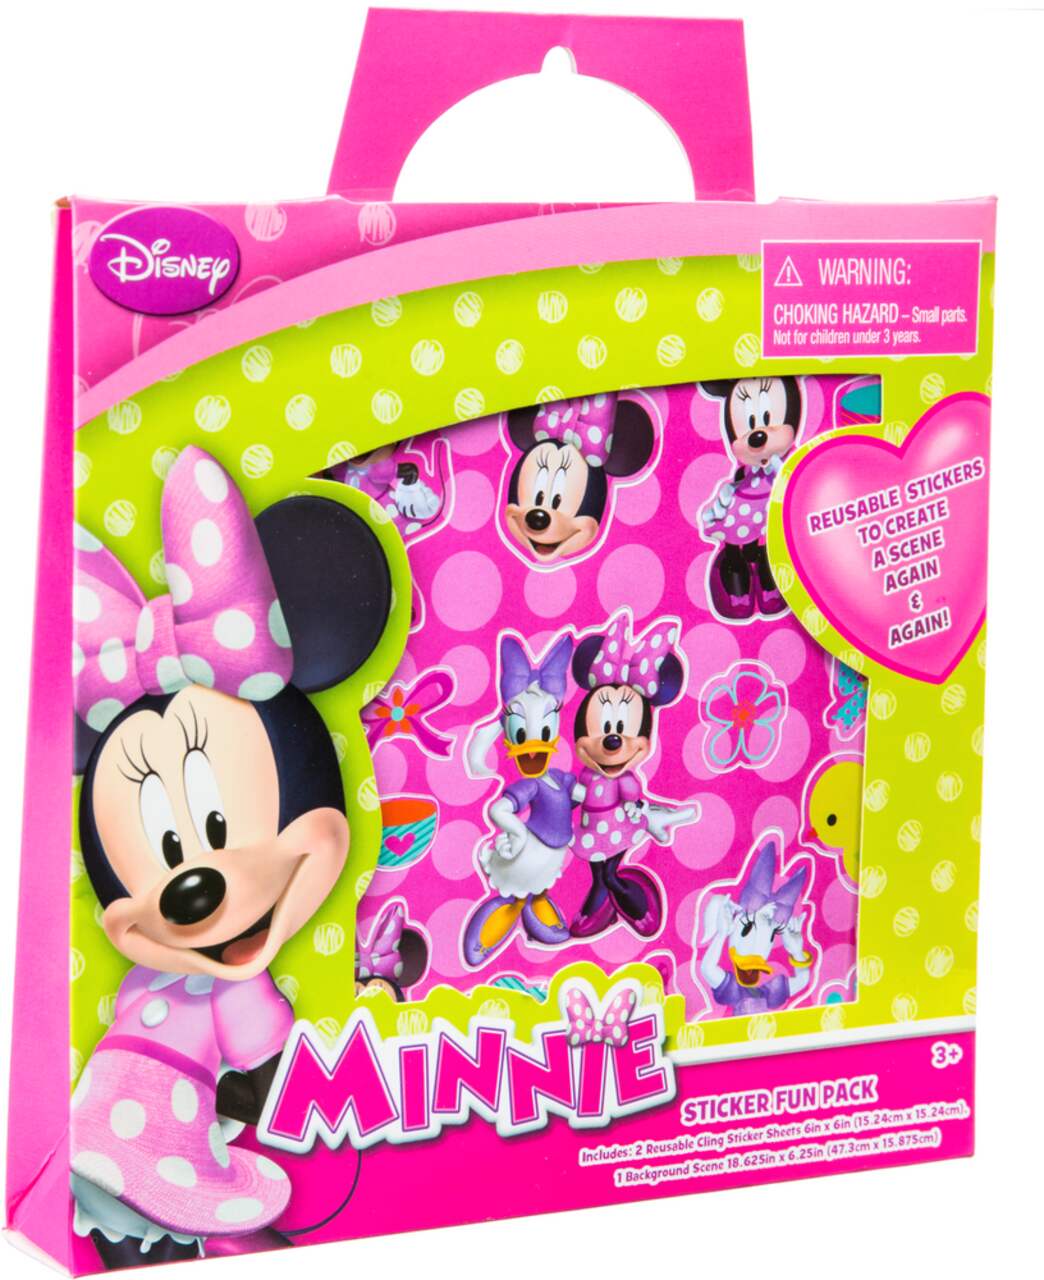 New Minnie Mouse graphics @huggies #FUNFASTEASY #contest